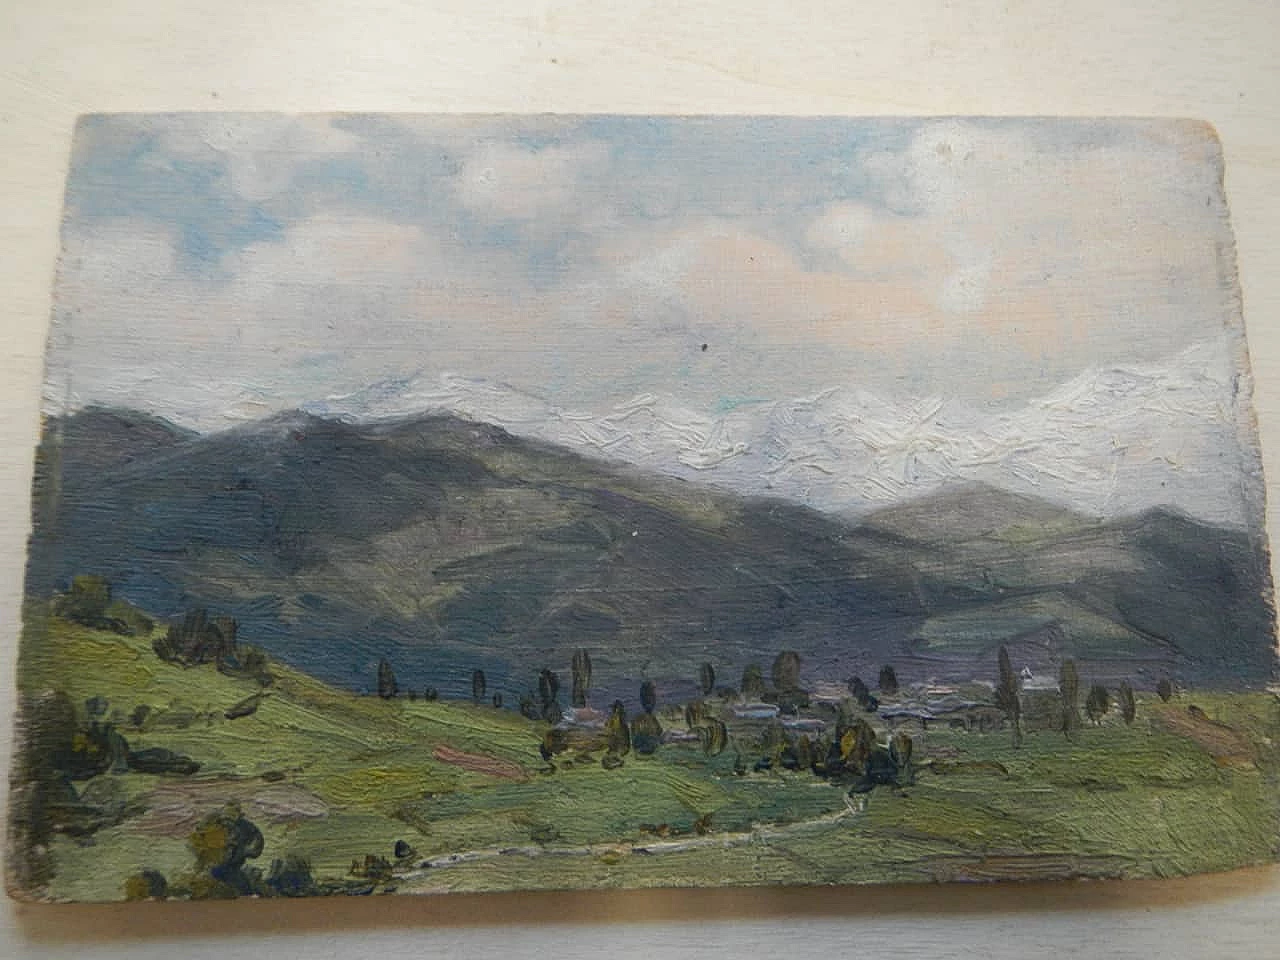 Des Champs, Pyrenees, painting on wood, early 20th century 10